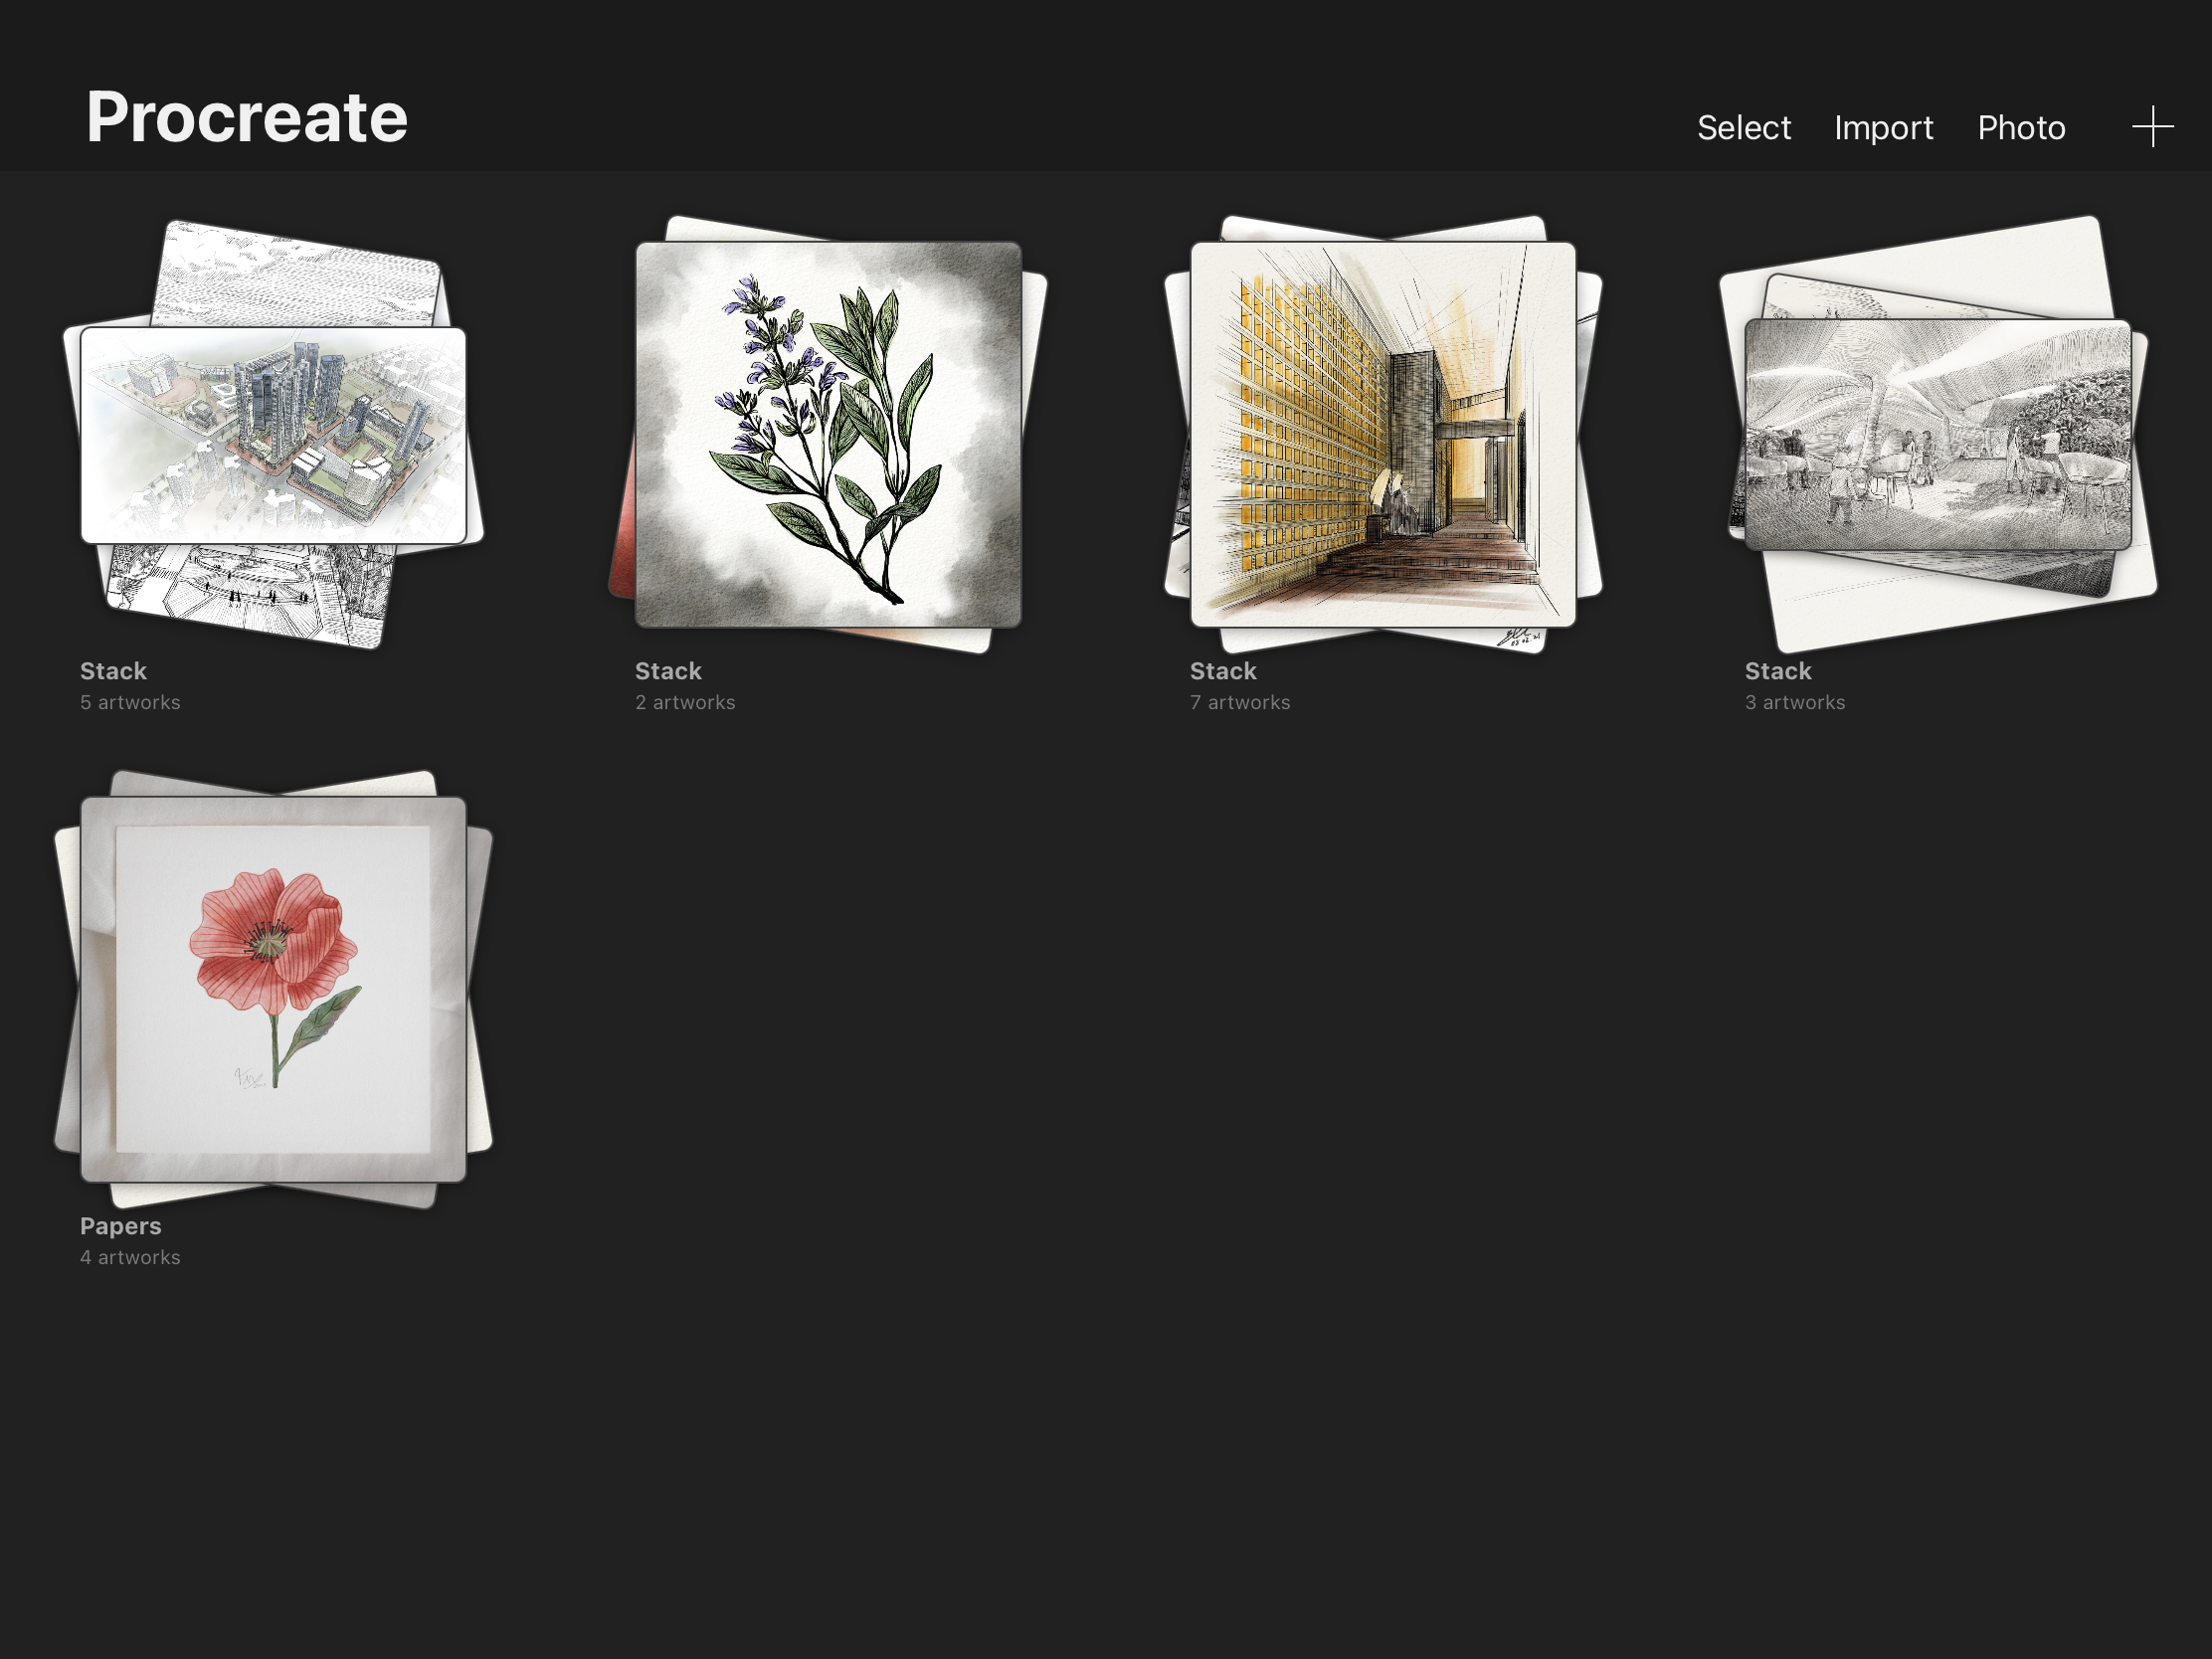 It shows the start page of the application. It calls a gallery.